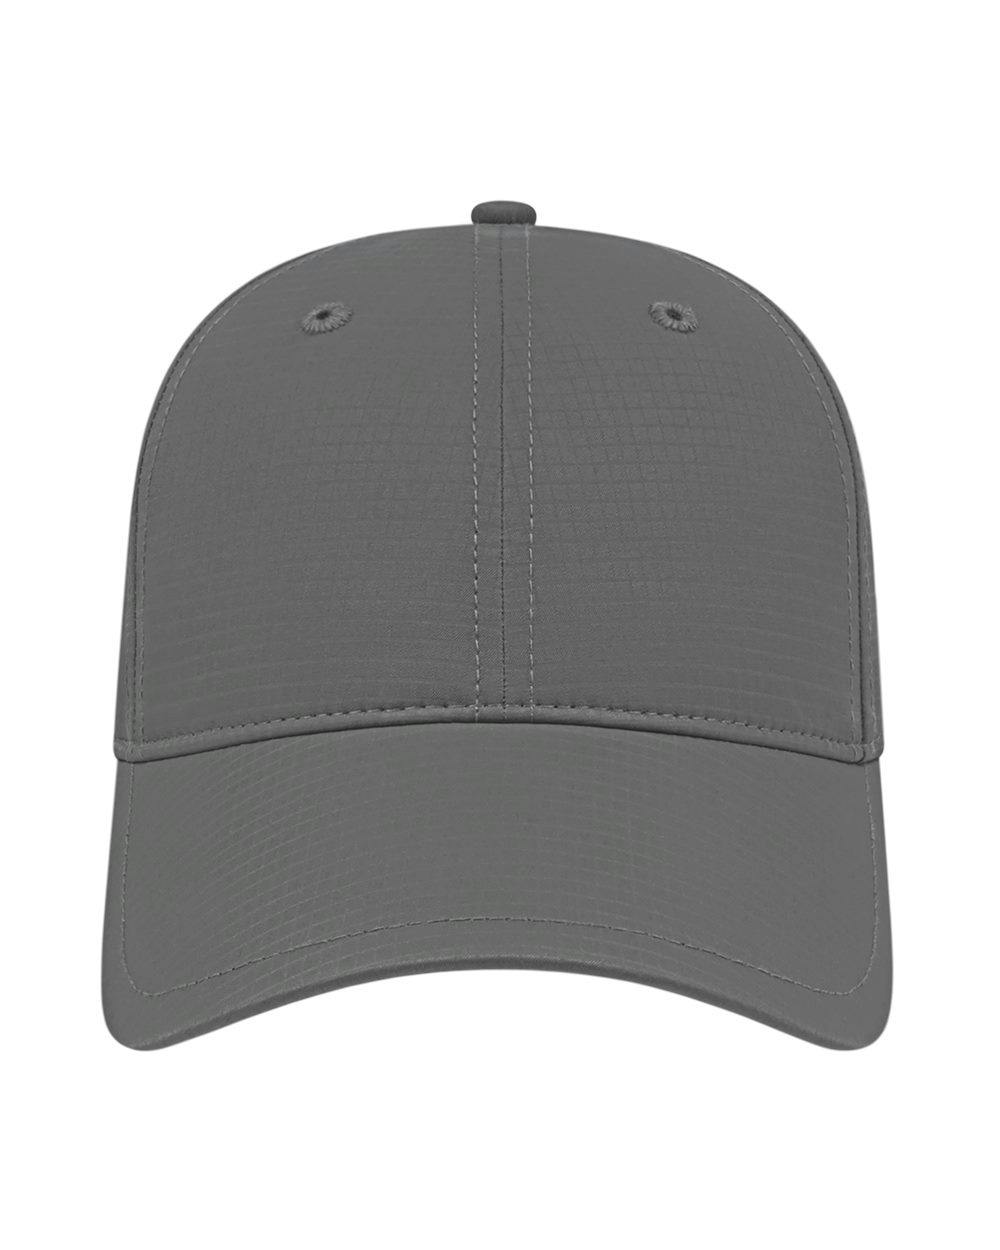 Image for Soft Fit Active Wear Cap - i7007